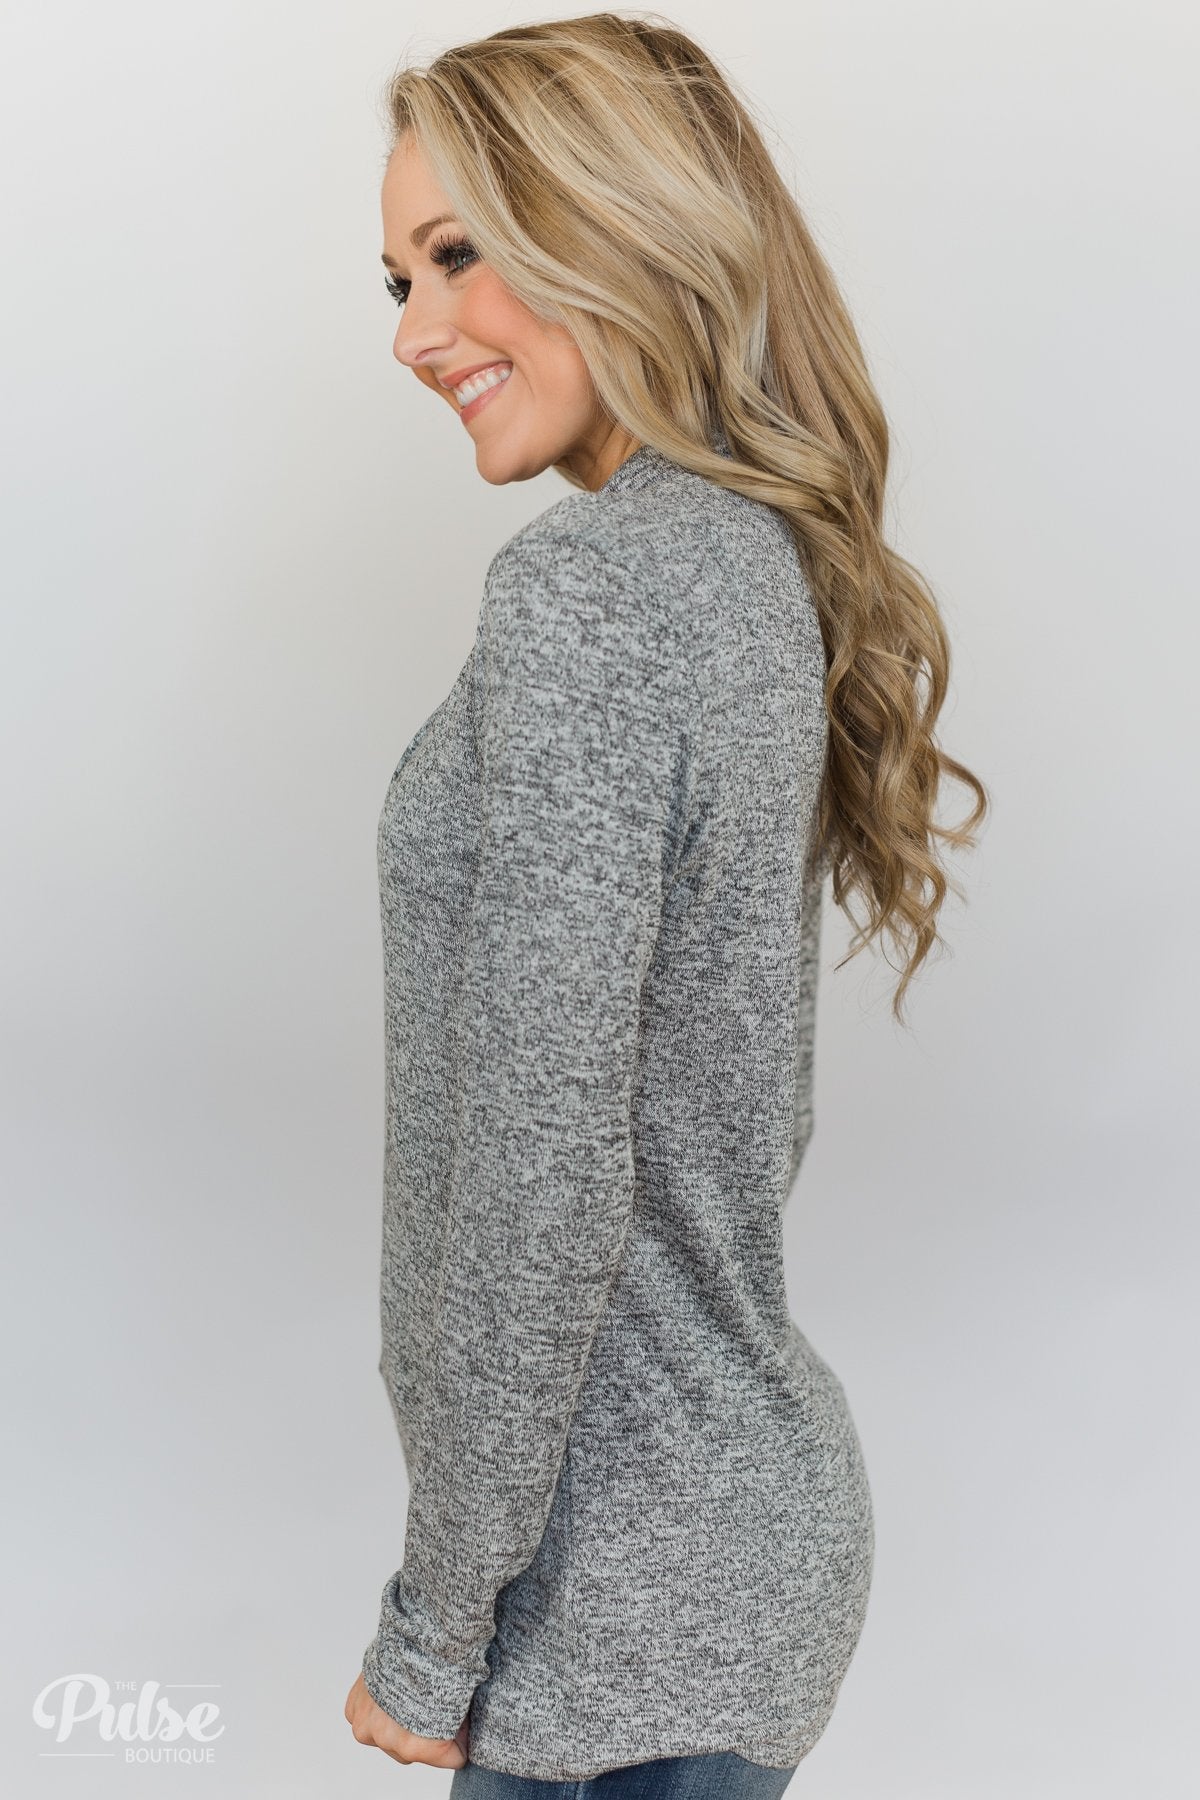 All This Time Zipper Pullover Top- Heather Grey